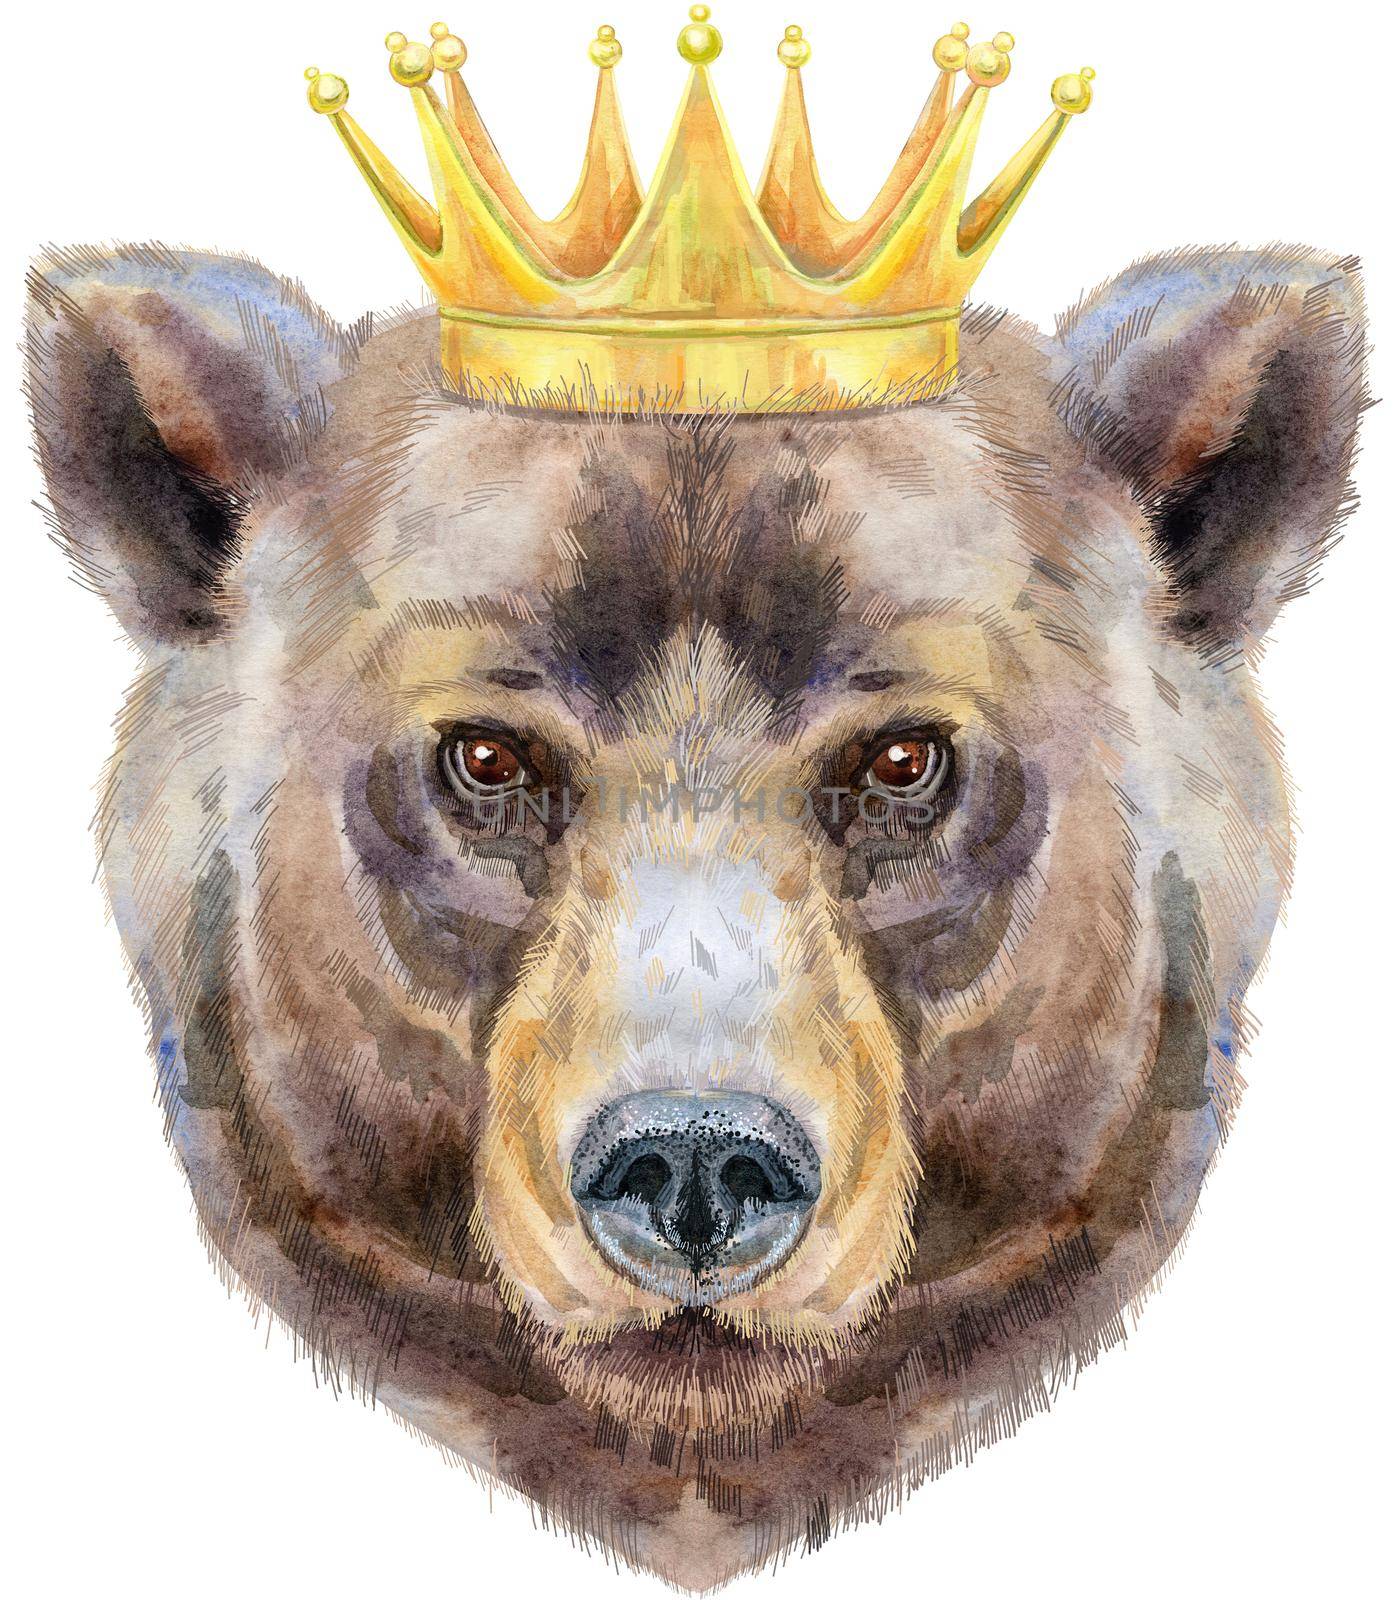 Bear head in gold crown. Watercolor bear painting illustration isolated on white background by NataOmsk